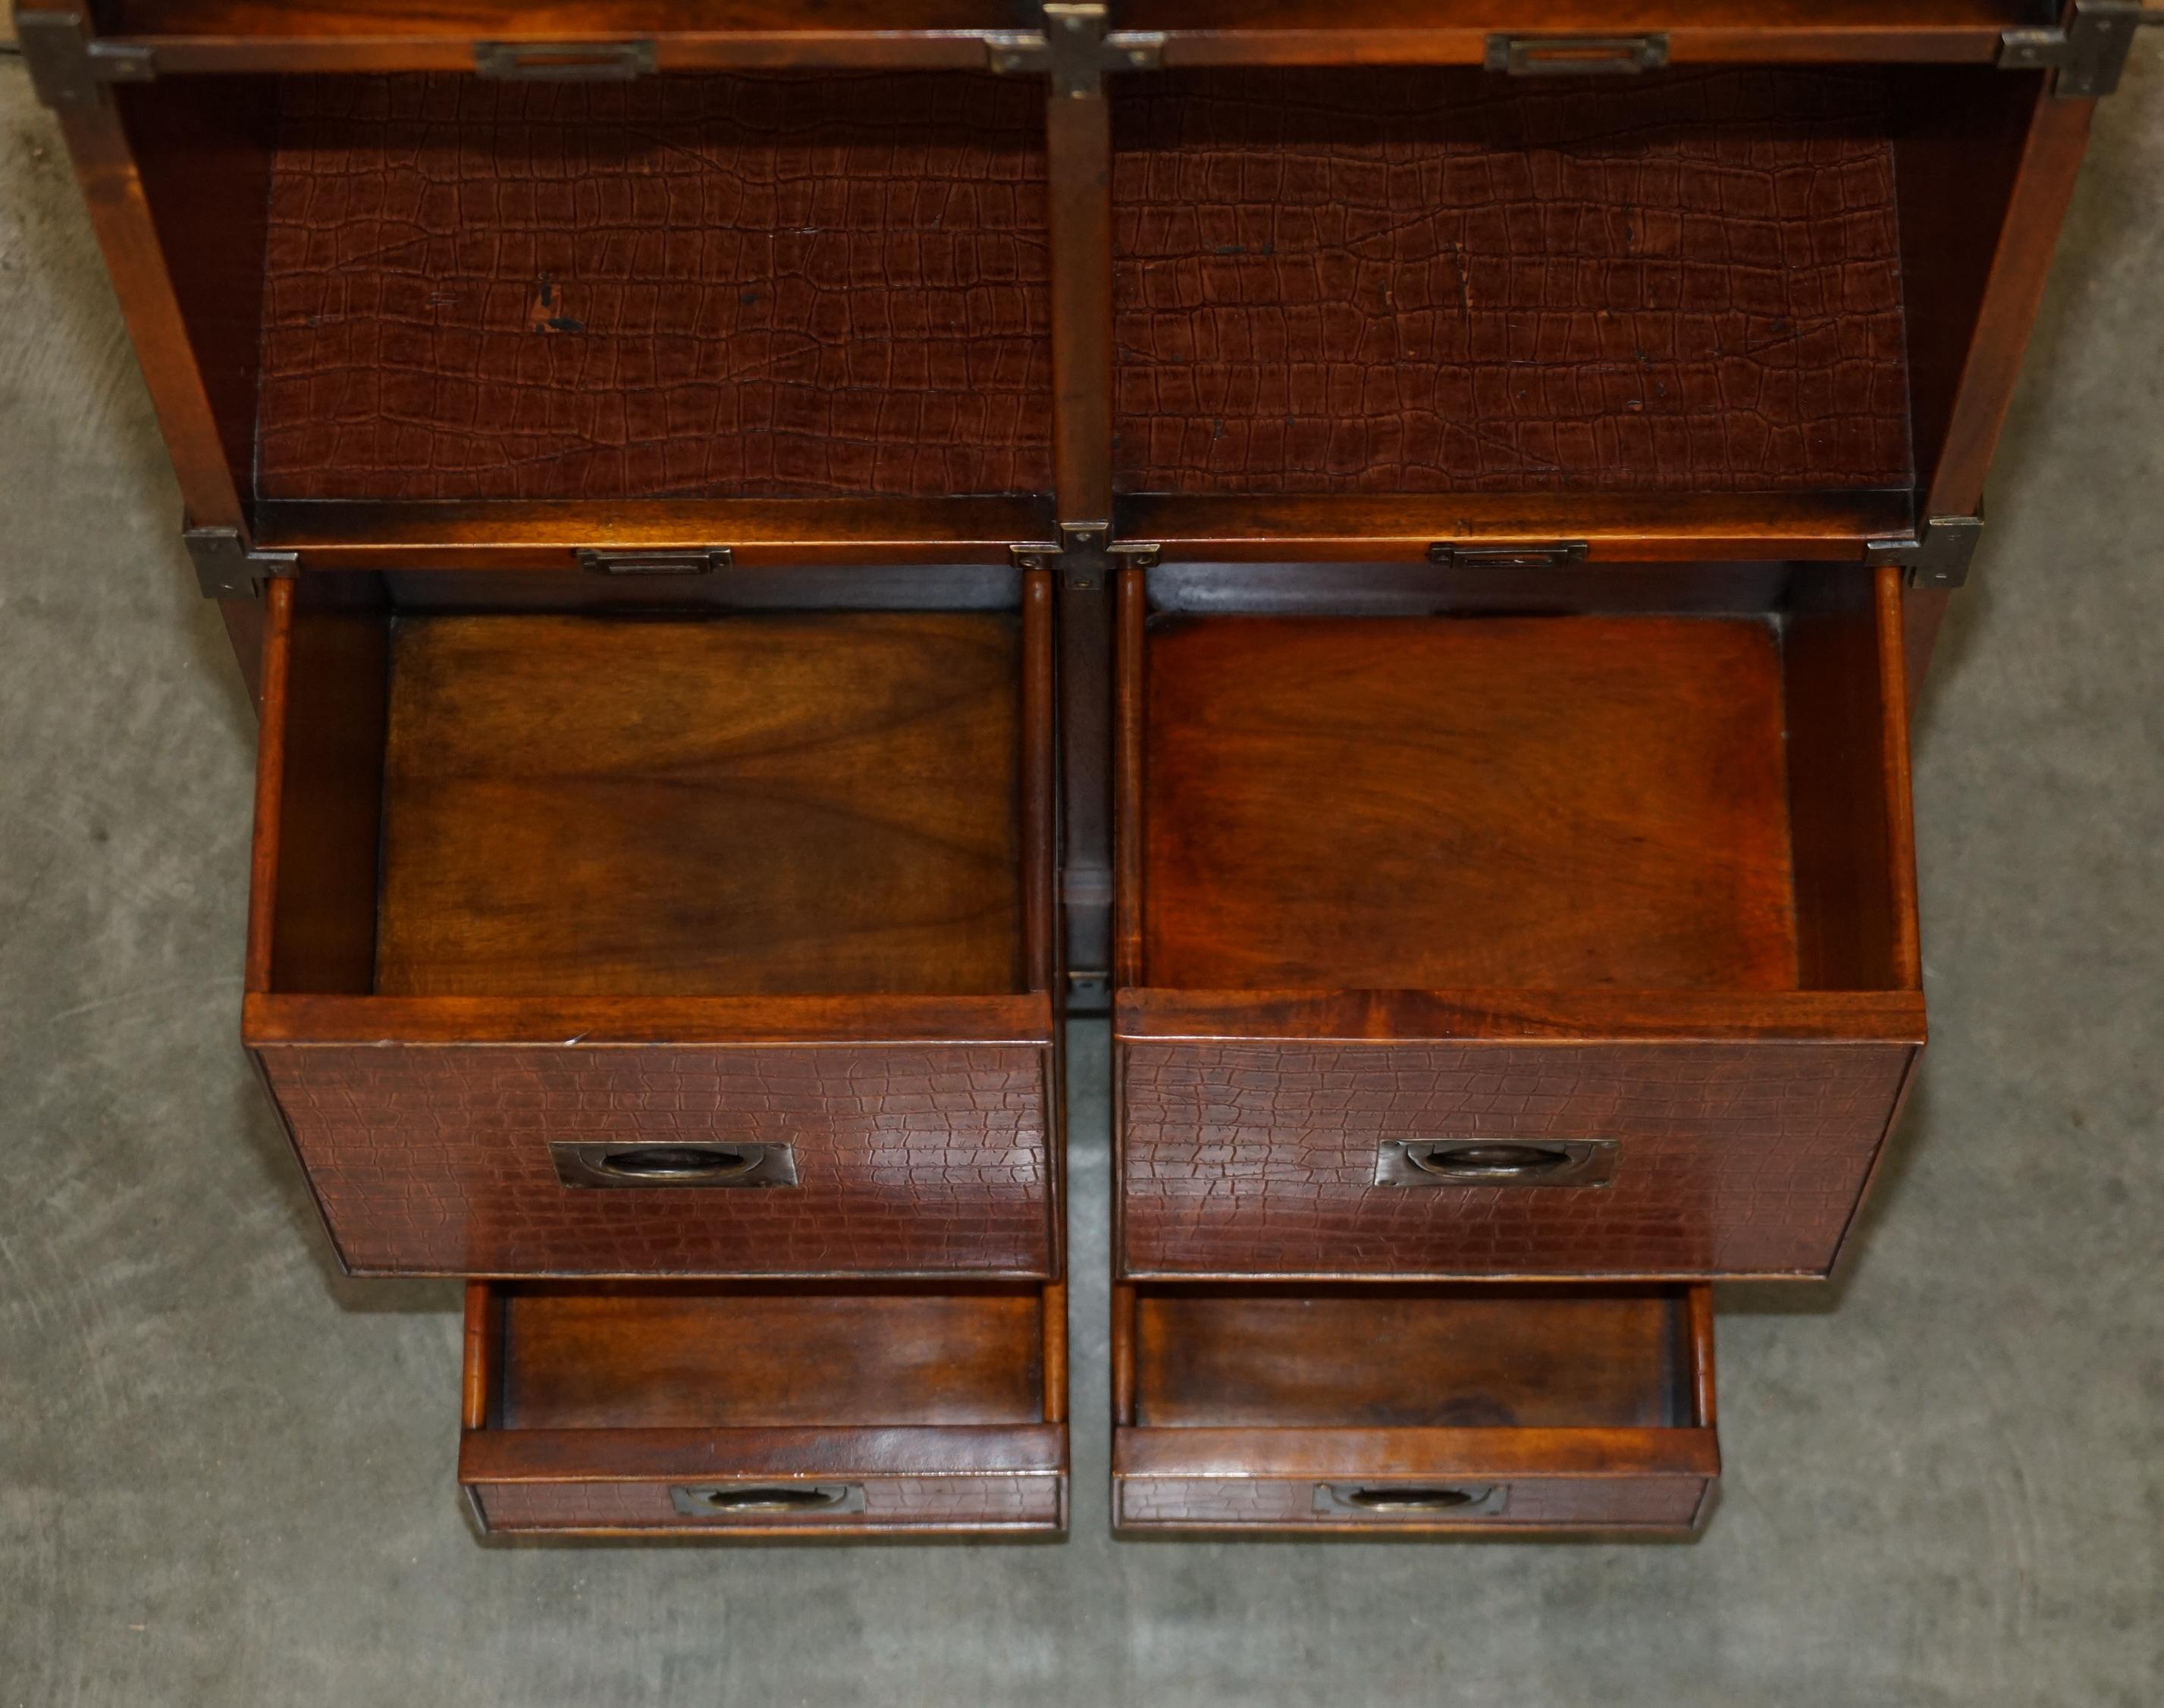 PAIR OF CROCODILE LEATHER Offene LiBRARY-BOOKCASES MIT DRAWERS & RECORD SLOTS im Angebot 12